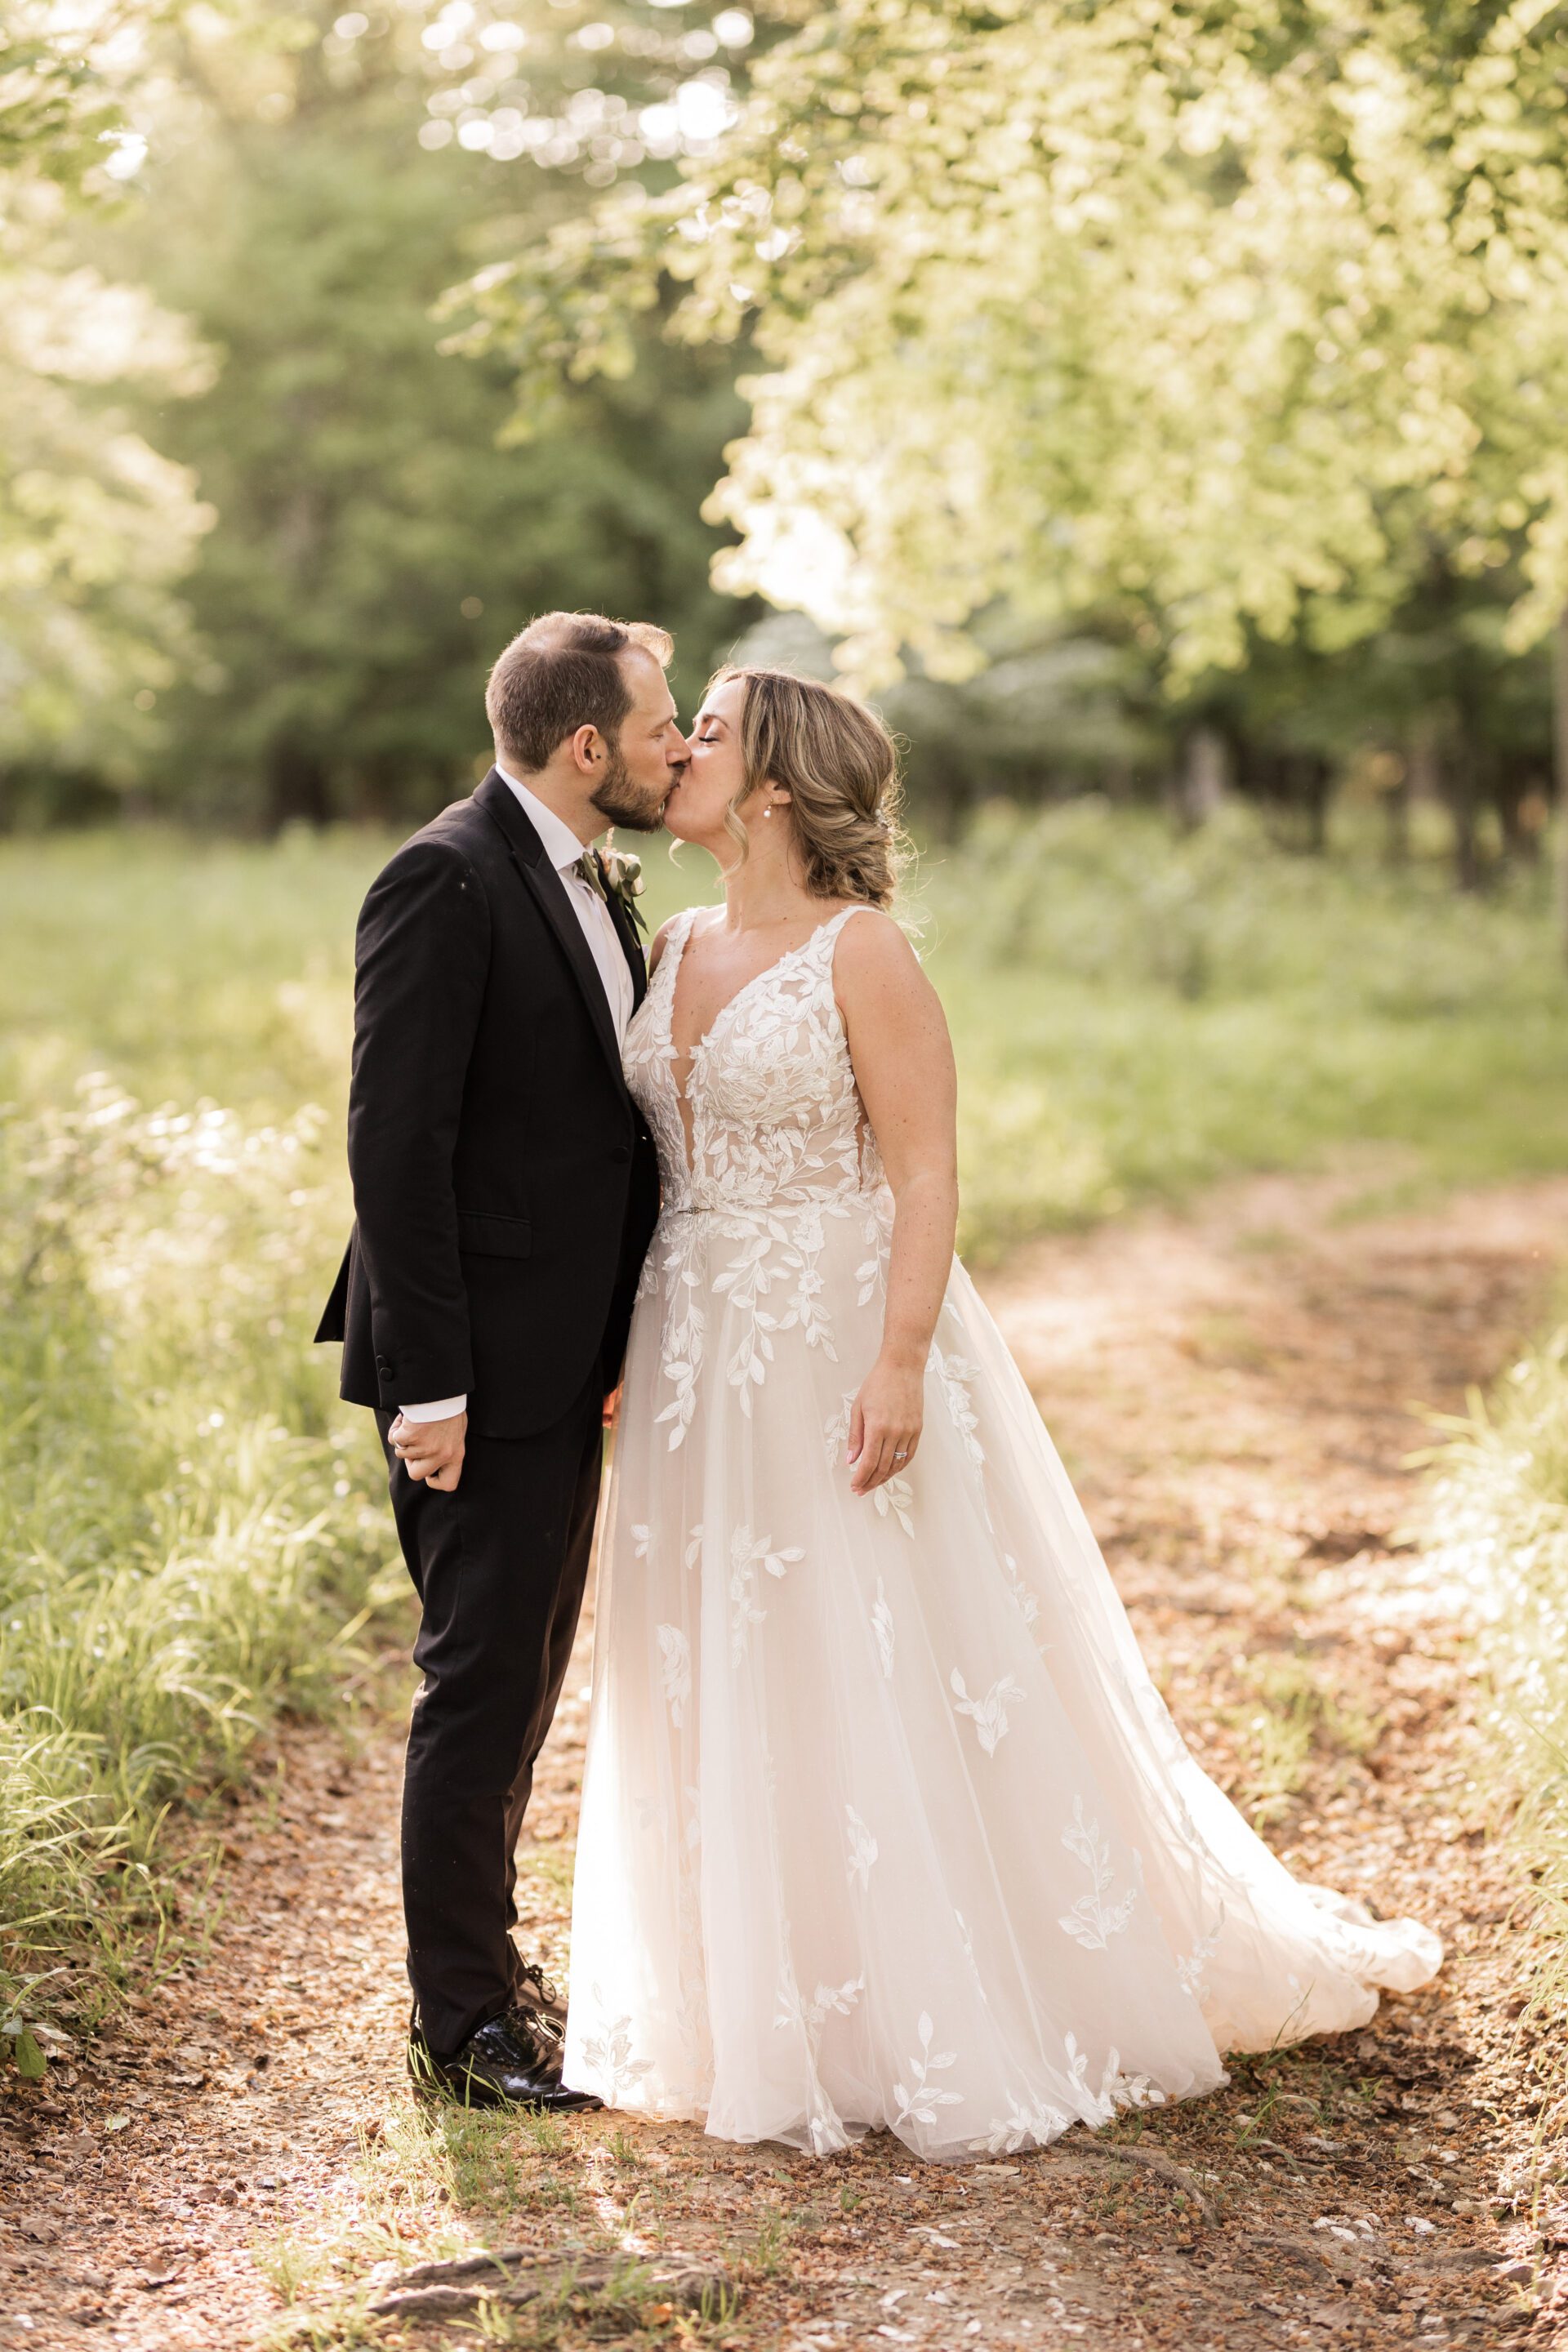 The bride and groom share a kiss during golden hour at their barn wedding